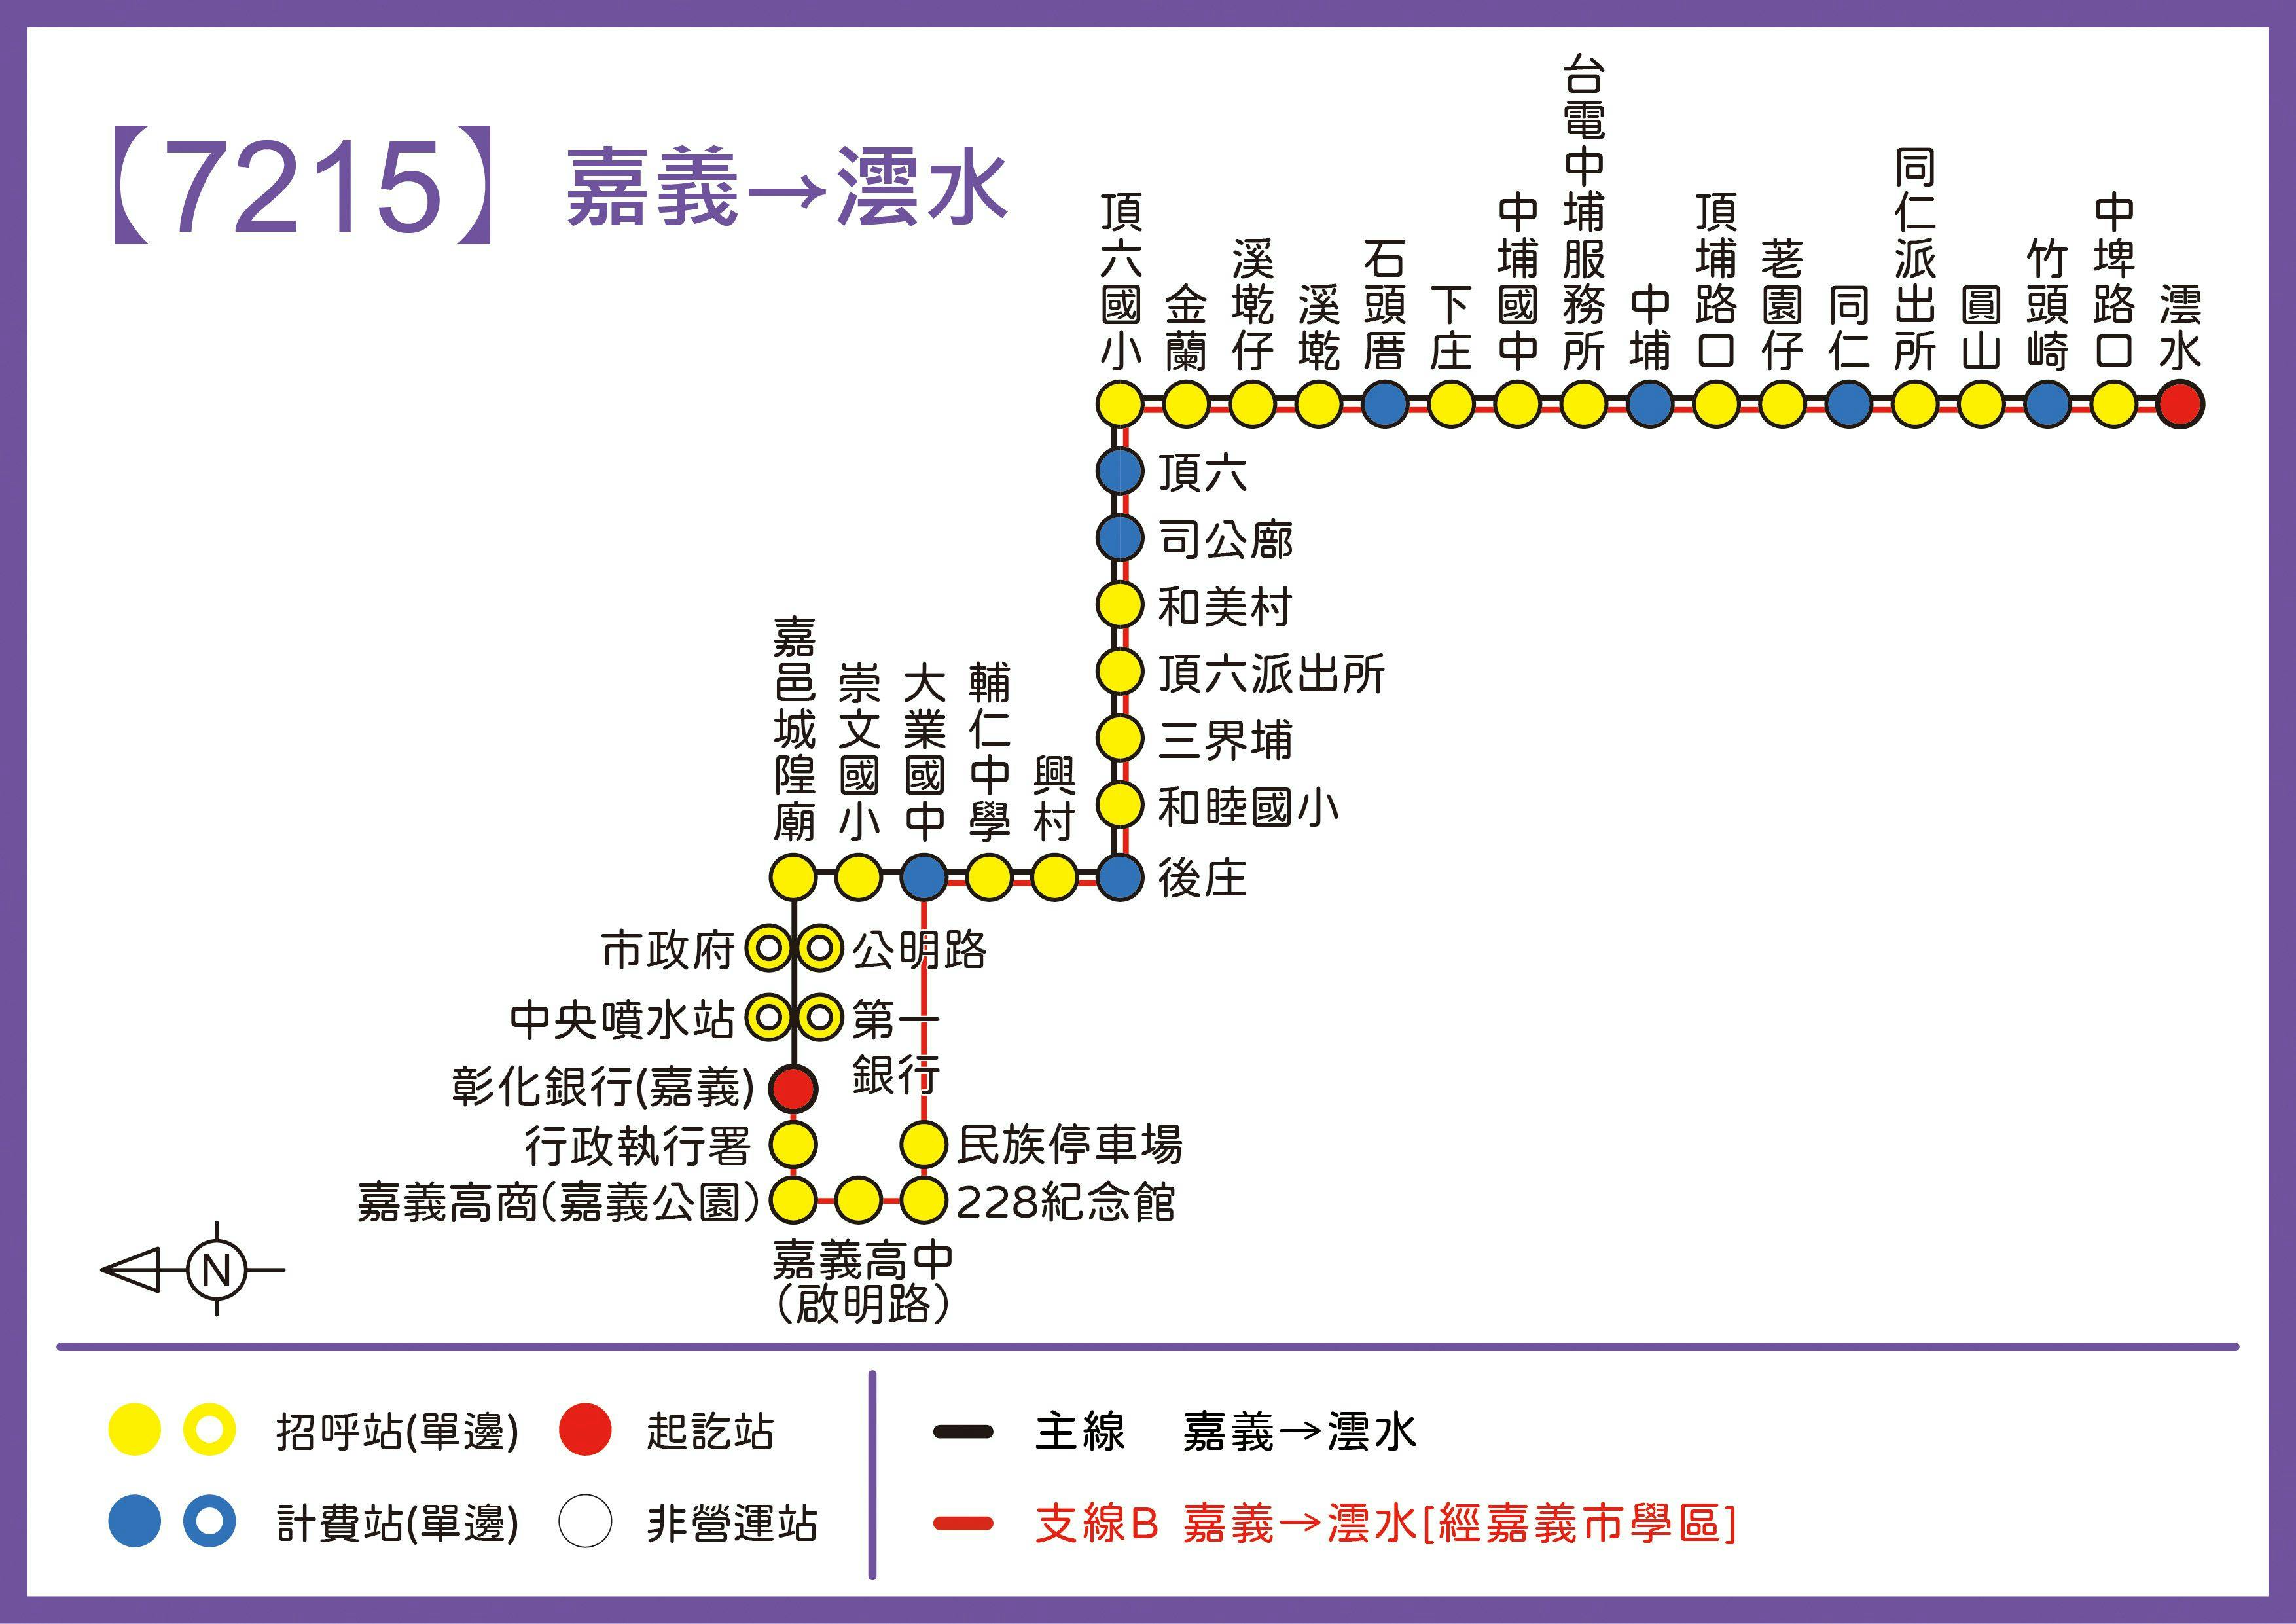 7215Route Map-Chiayi Bus